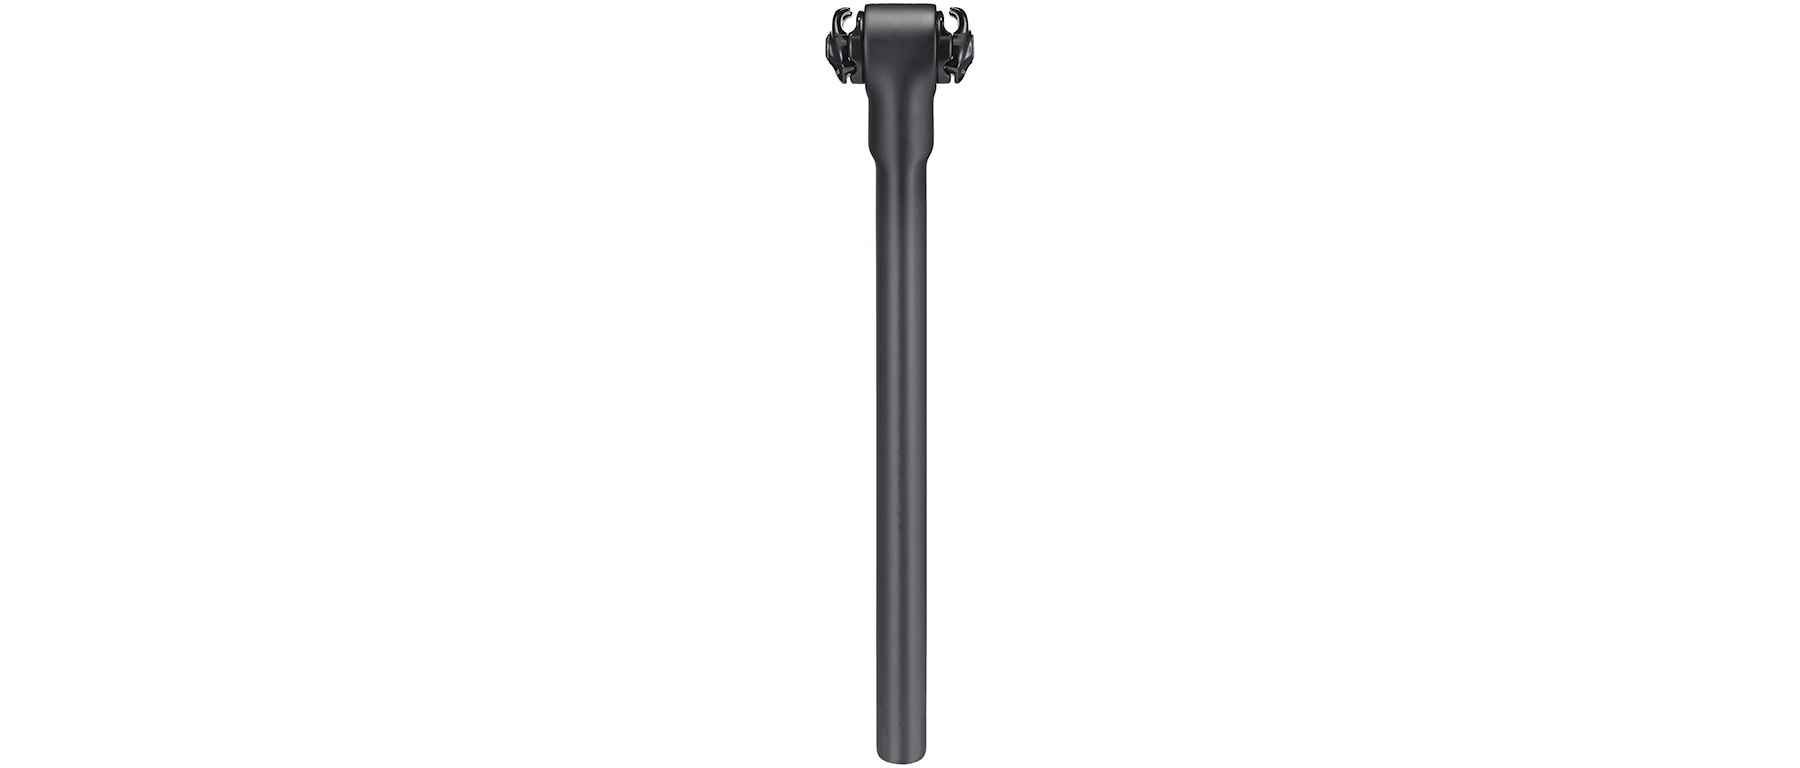 Specialized S-Works Tarmac Carbon Seatpost